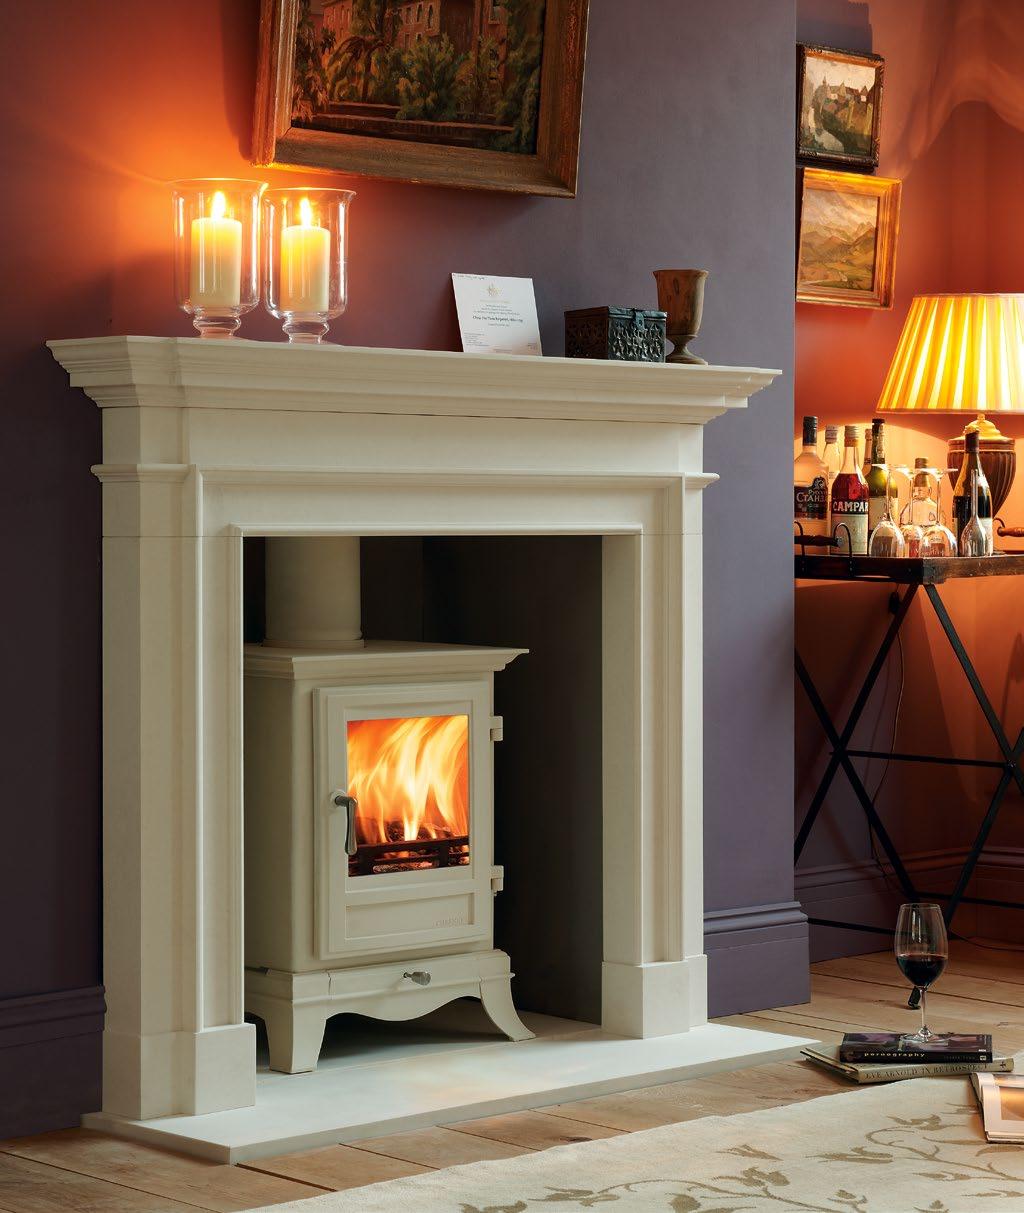 2 Chesney s Solid Fuel Stove Collection The Beaumont 6 kilowatt stove in ivory paint finish is